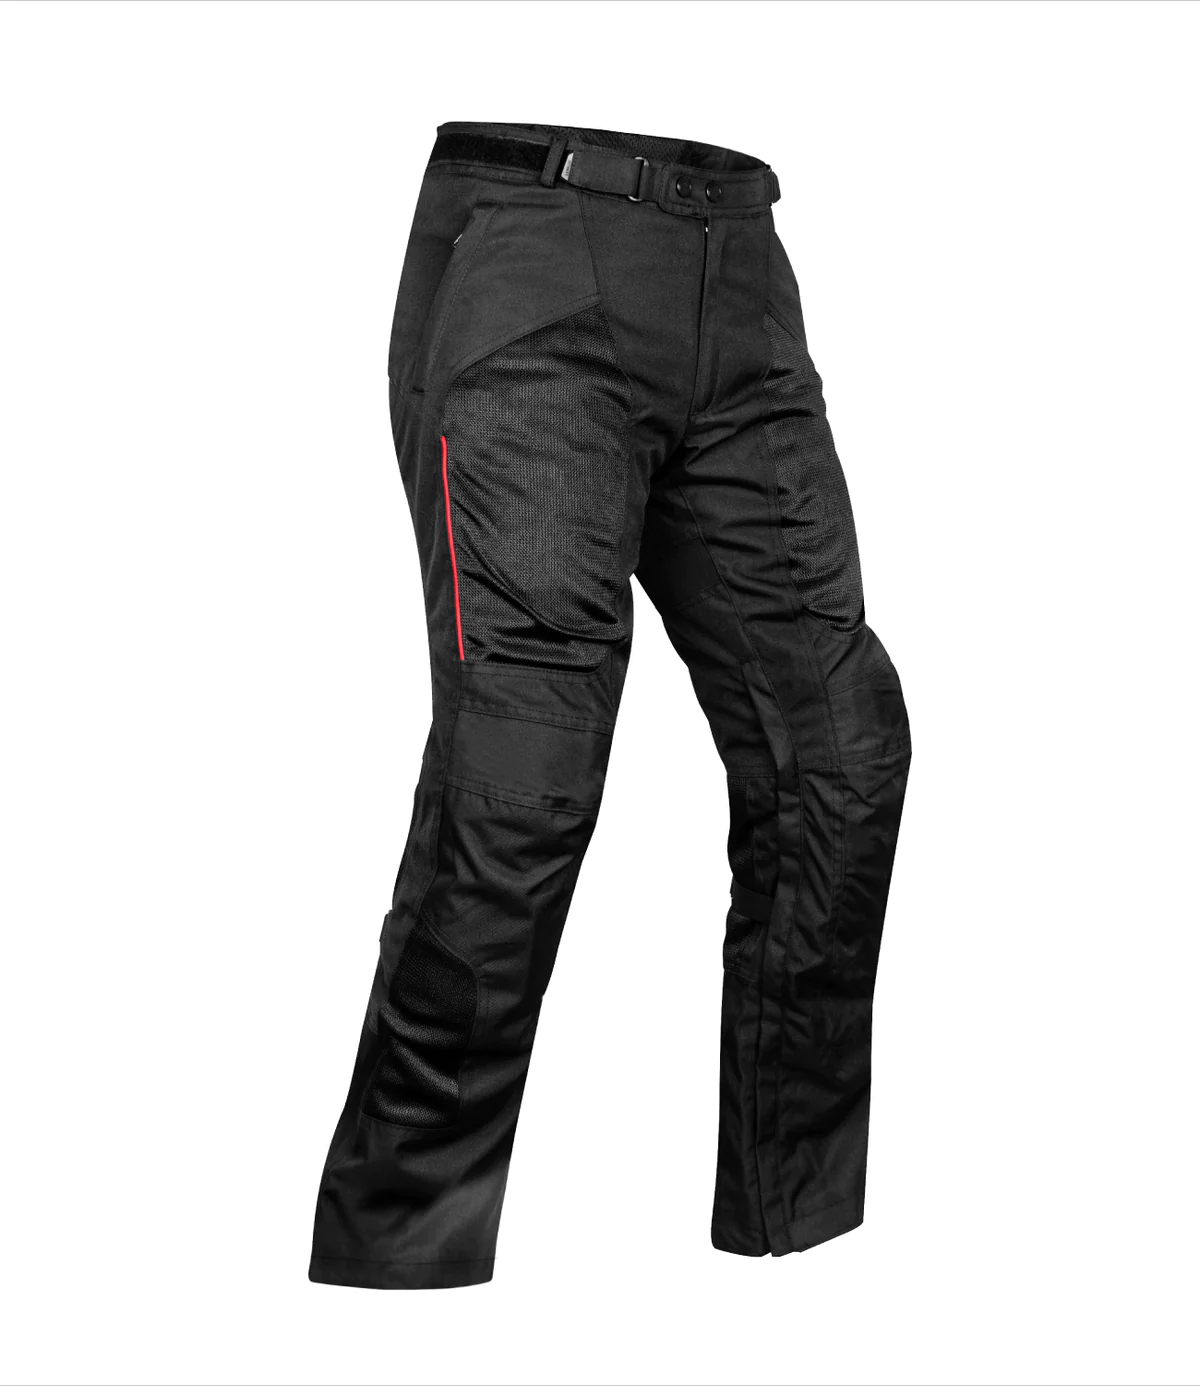 Stock Update of Solace S30 & Coolpro riding pants 👖 . S30 Riding Pant  Black Available in S,M,L,XL,3XL sizes 7799mrp . Coolpro Mesh Riding Pant  Black... | By Letz RideFacebook